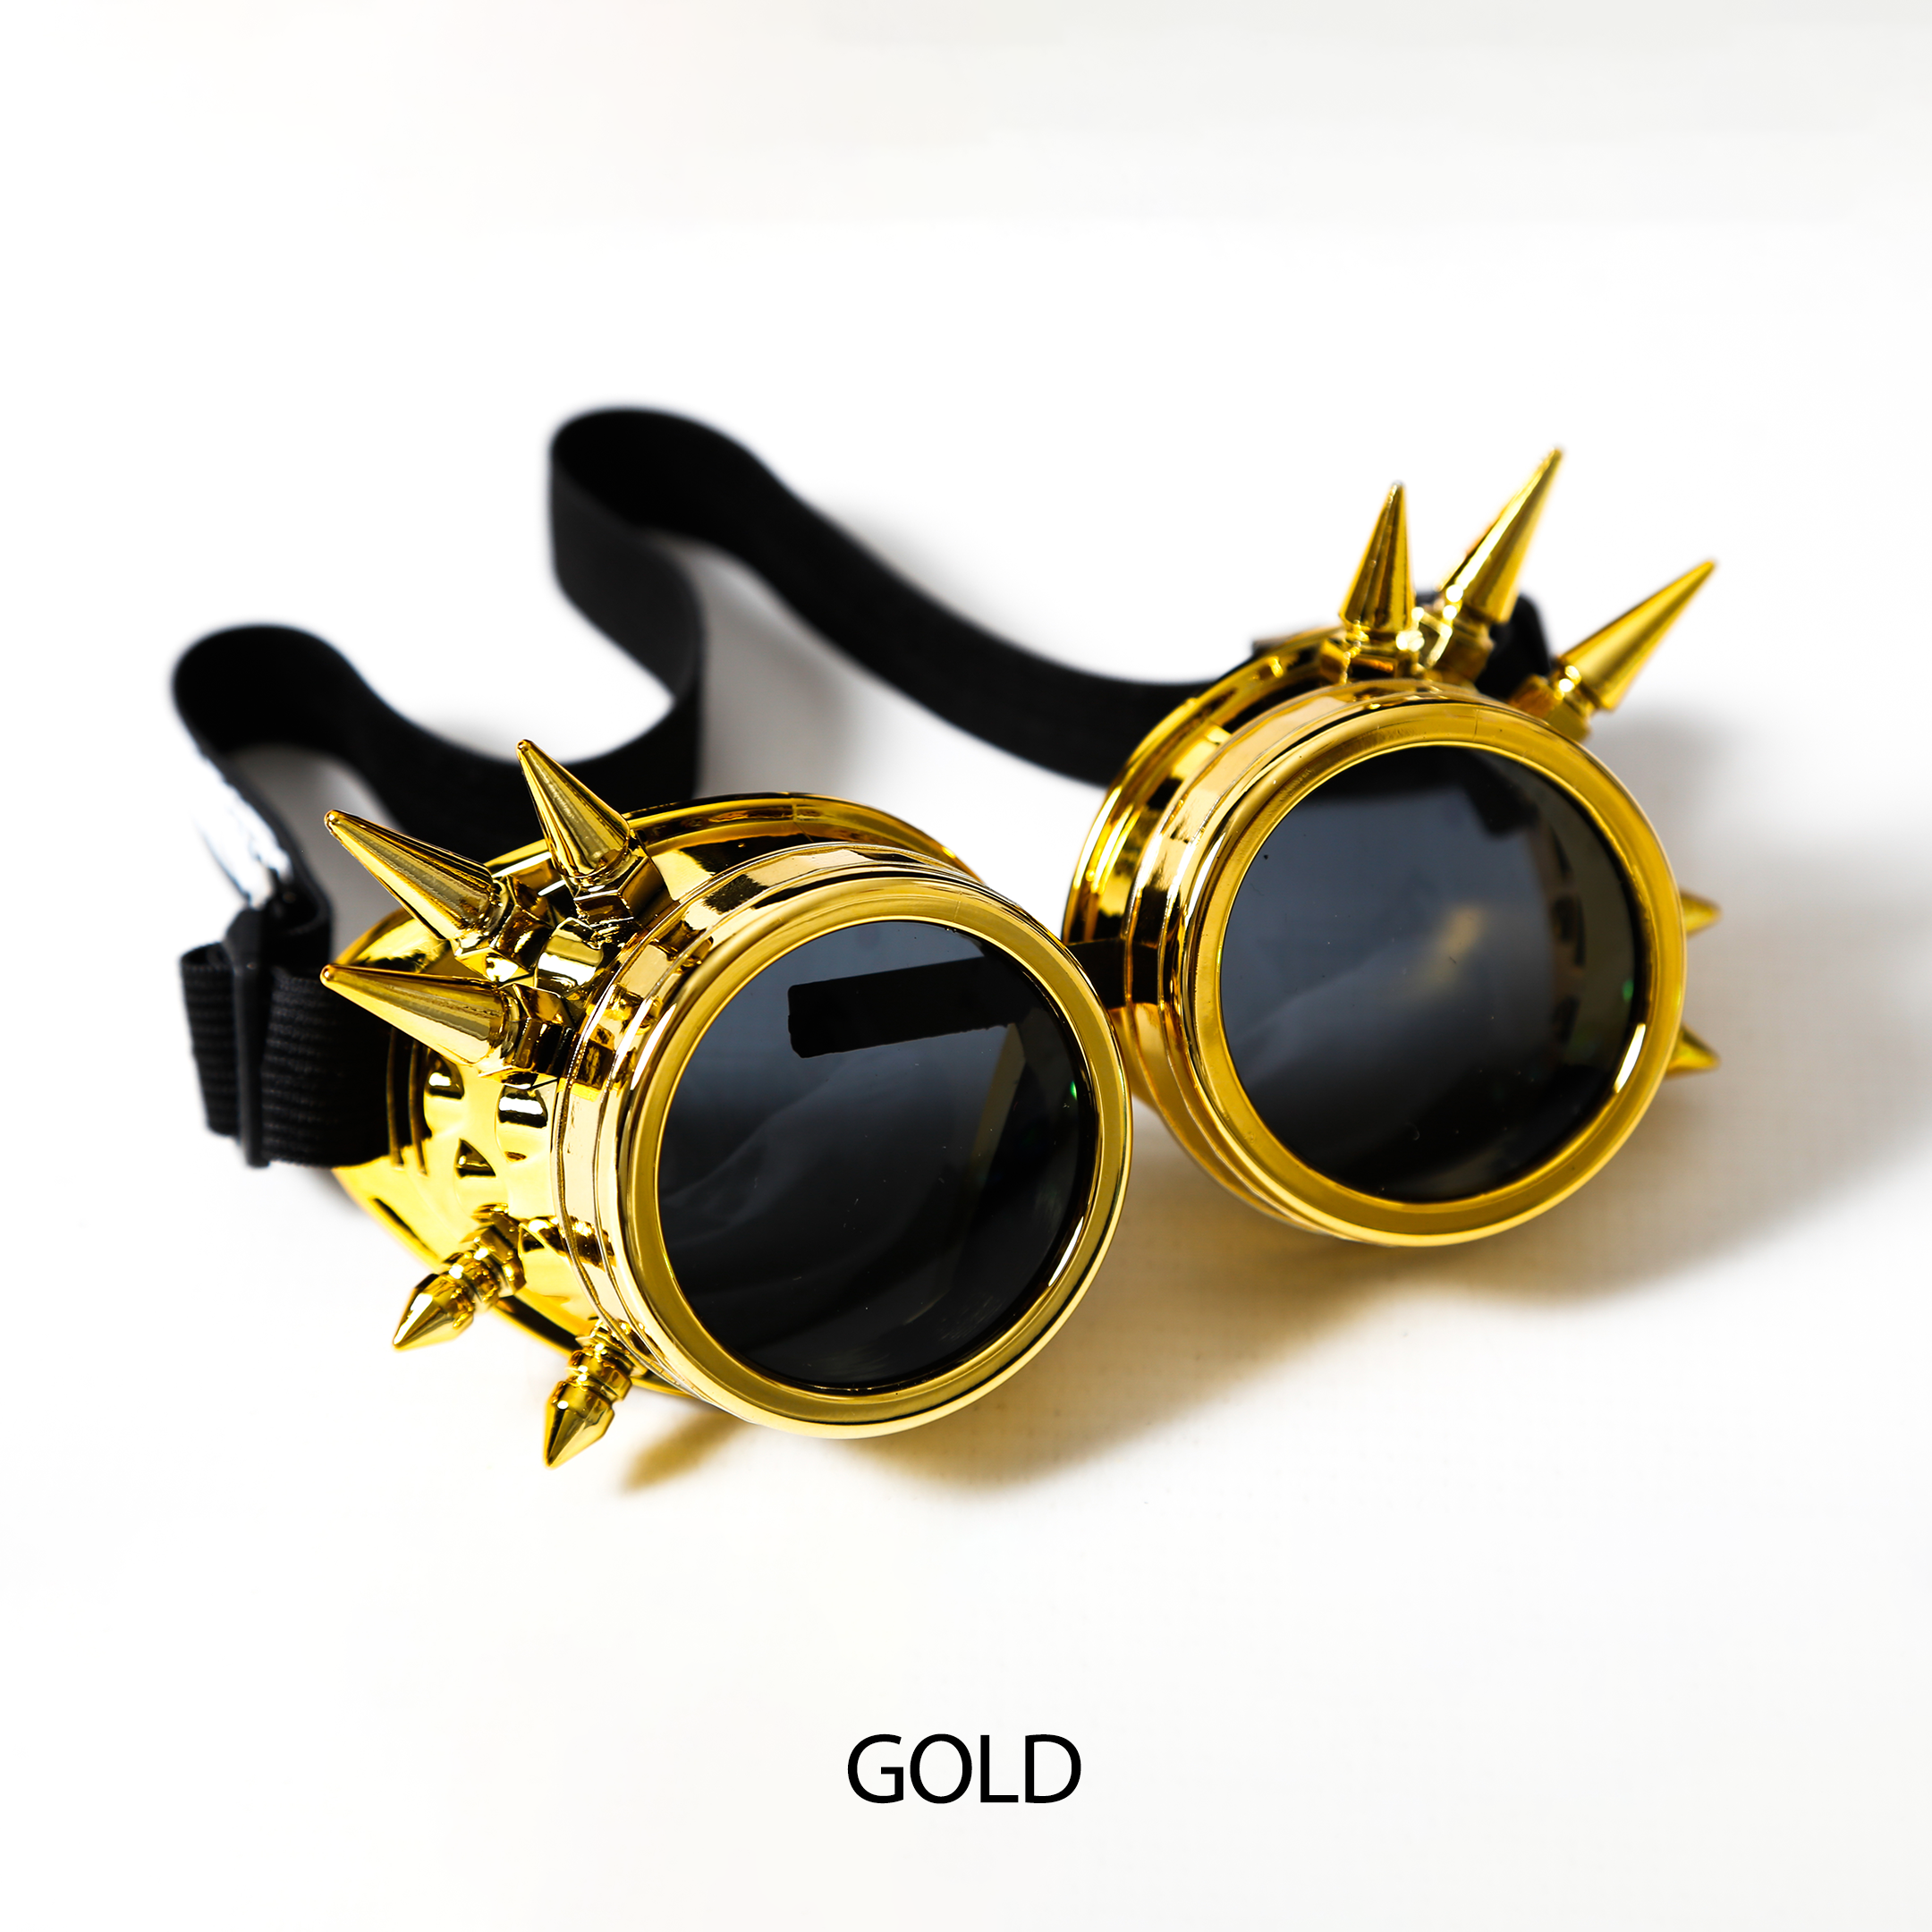 gold steampunk black lens glasses Electro Glow | South Africa's Best LED Festival Gear & Rave Clothes - festivals outfits, clothes festival, festival clothing south africa, festival ideas outfits, festival outfits rave, festival wear, steam punk goggle, rave glasses, outfit for a rave, kaleidoscope glasses, diffraction glasses, clothes for a rave, rave sunglasses, spectral glasses, rave goggles, clothes for a rave, rave clothing south africa, festival wear south africa, accessories festival